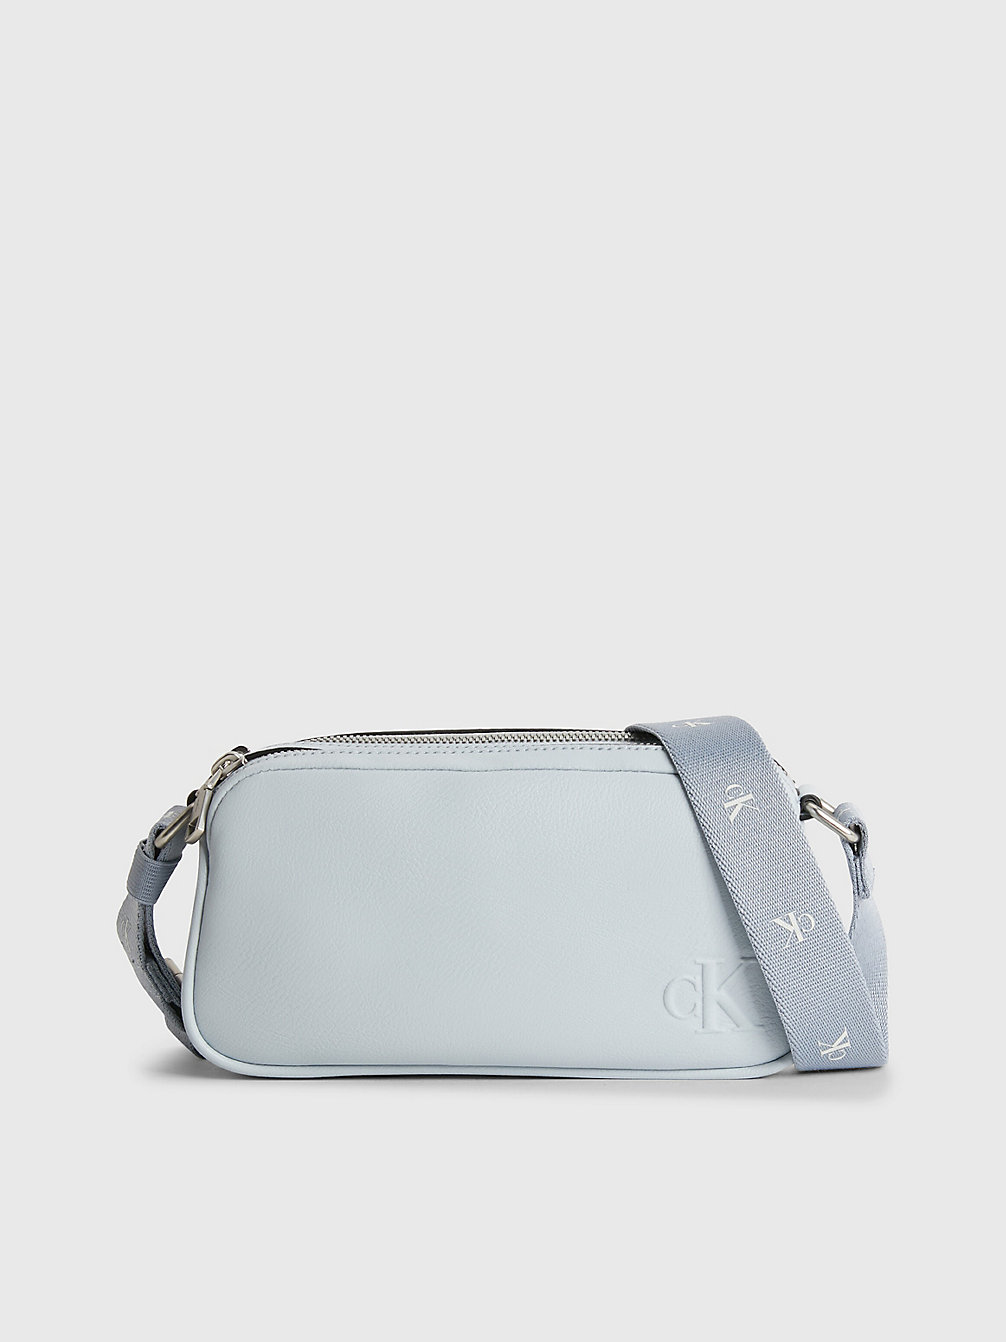 BLUE OASIS Recycled Crossbody Bag undefined women Calvin Klein